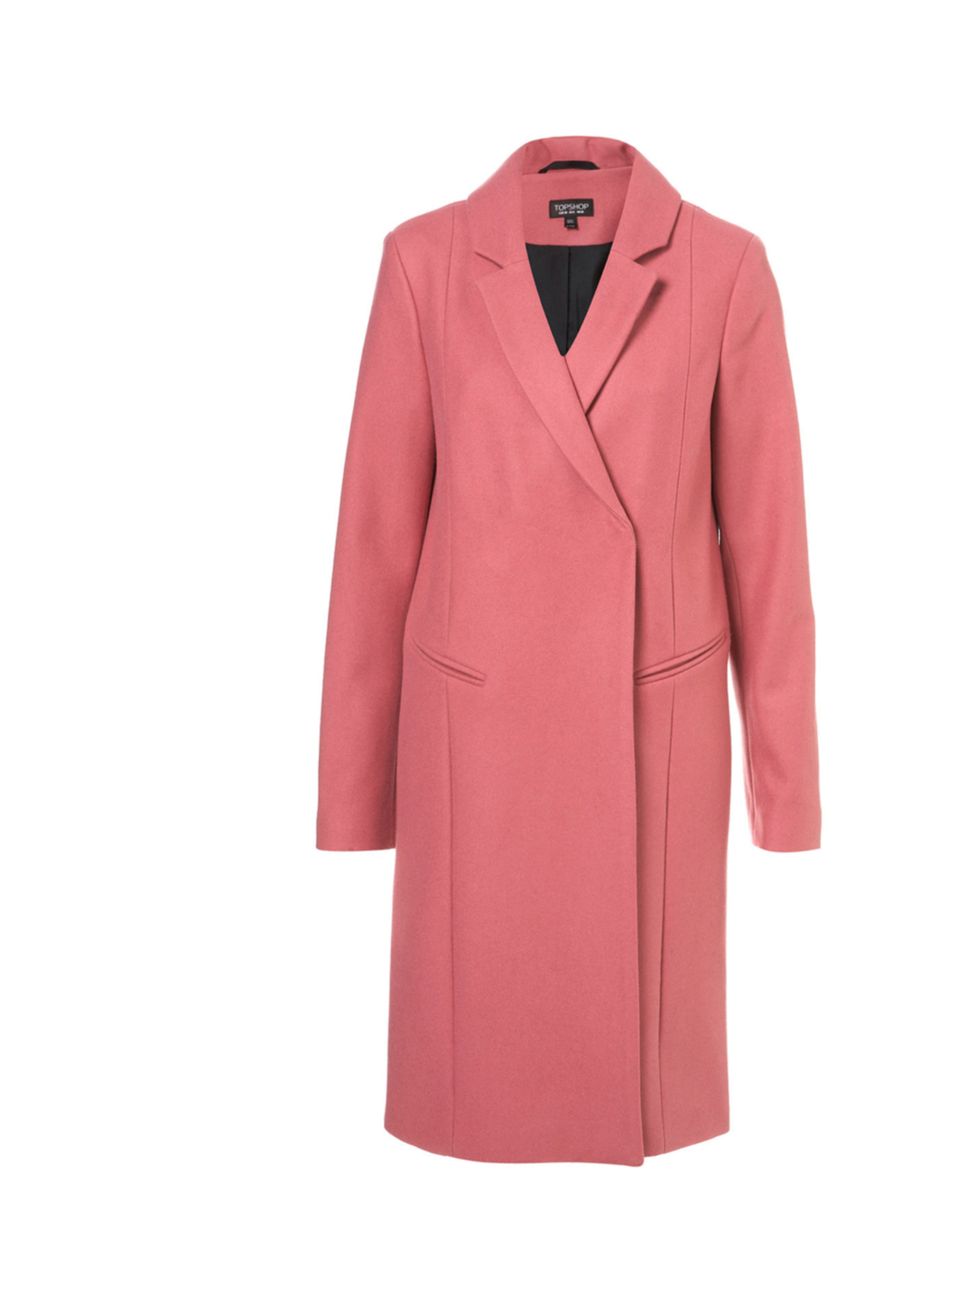 <p>A pink wool coat? You bet. A little bit Celine, a hell of a lot fabulous, take a chance with a loud coat, we dares ya Topshop pink wool coat, £95</p><p><a href="http://shopping.elleuk.com/browse/womens-clothes?fts=topshop+pink+coat">BUY NOW</a></p>